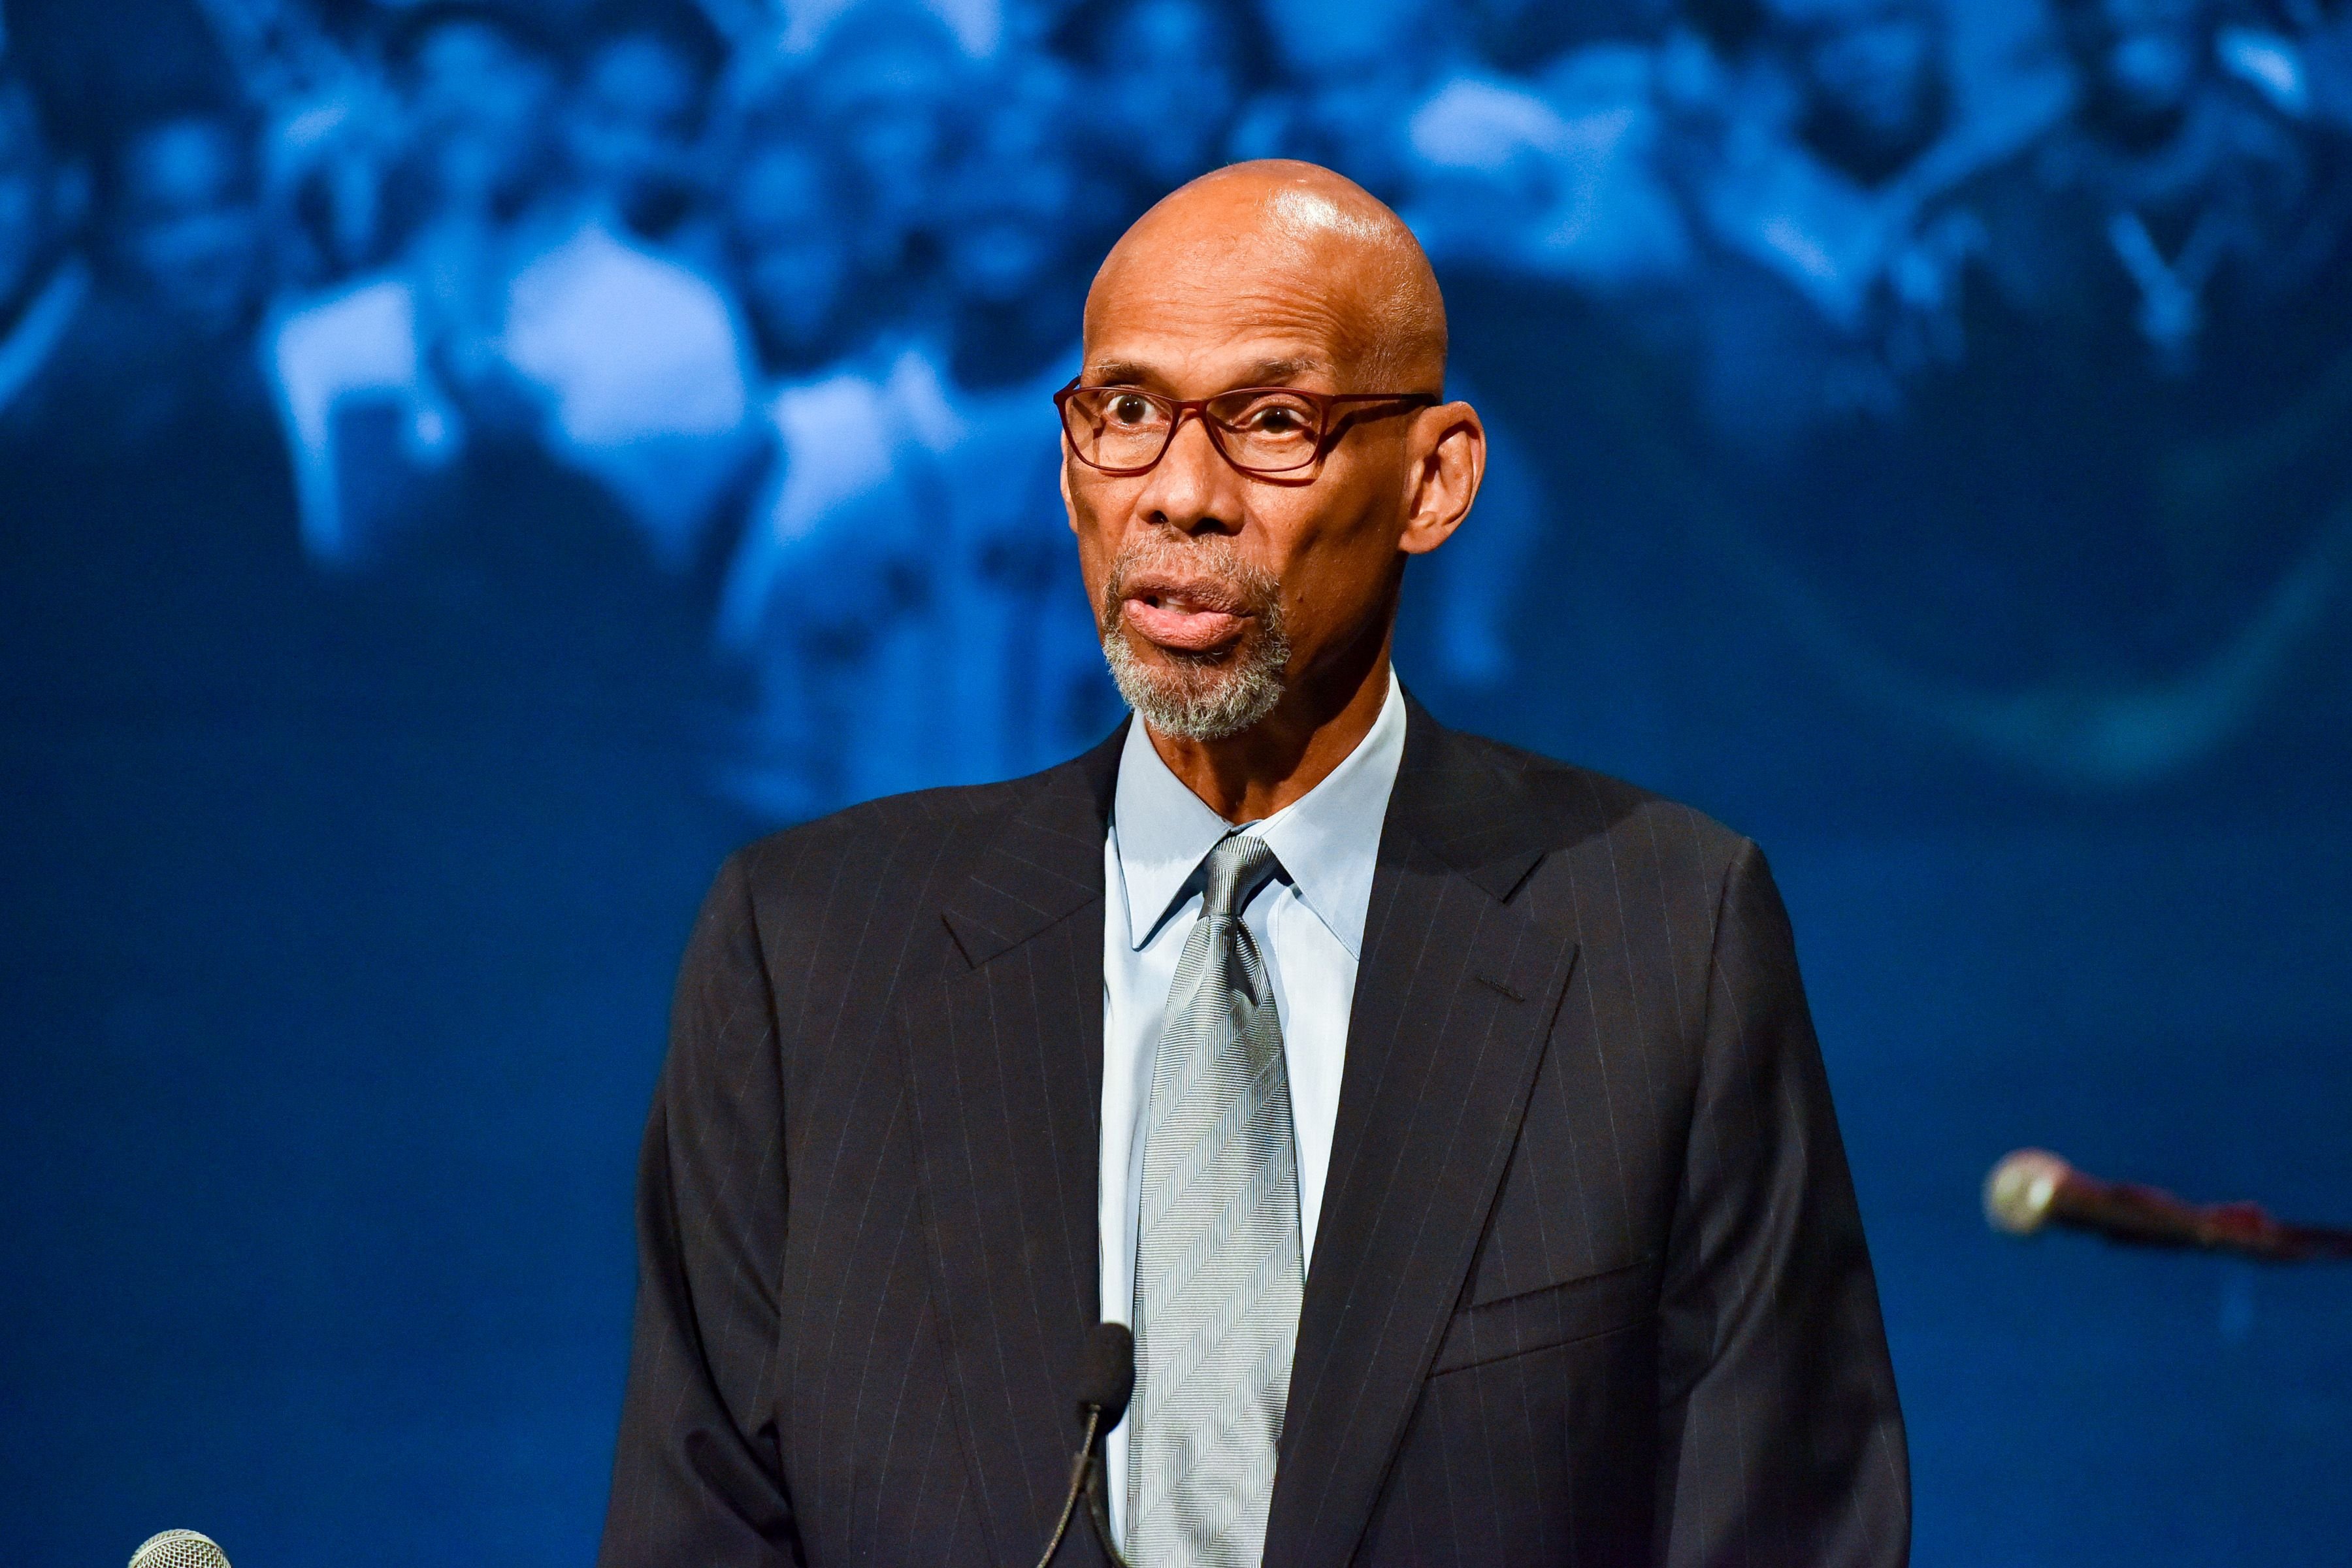 Kareem Abdul-Jabbar at The Gordon Parks Foundation 2019 Annual Awards Dinner And Auction on June 04, 2019 | Photo: Getty Images